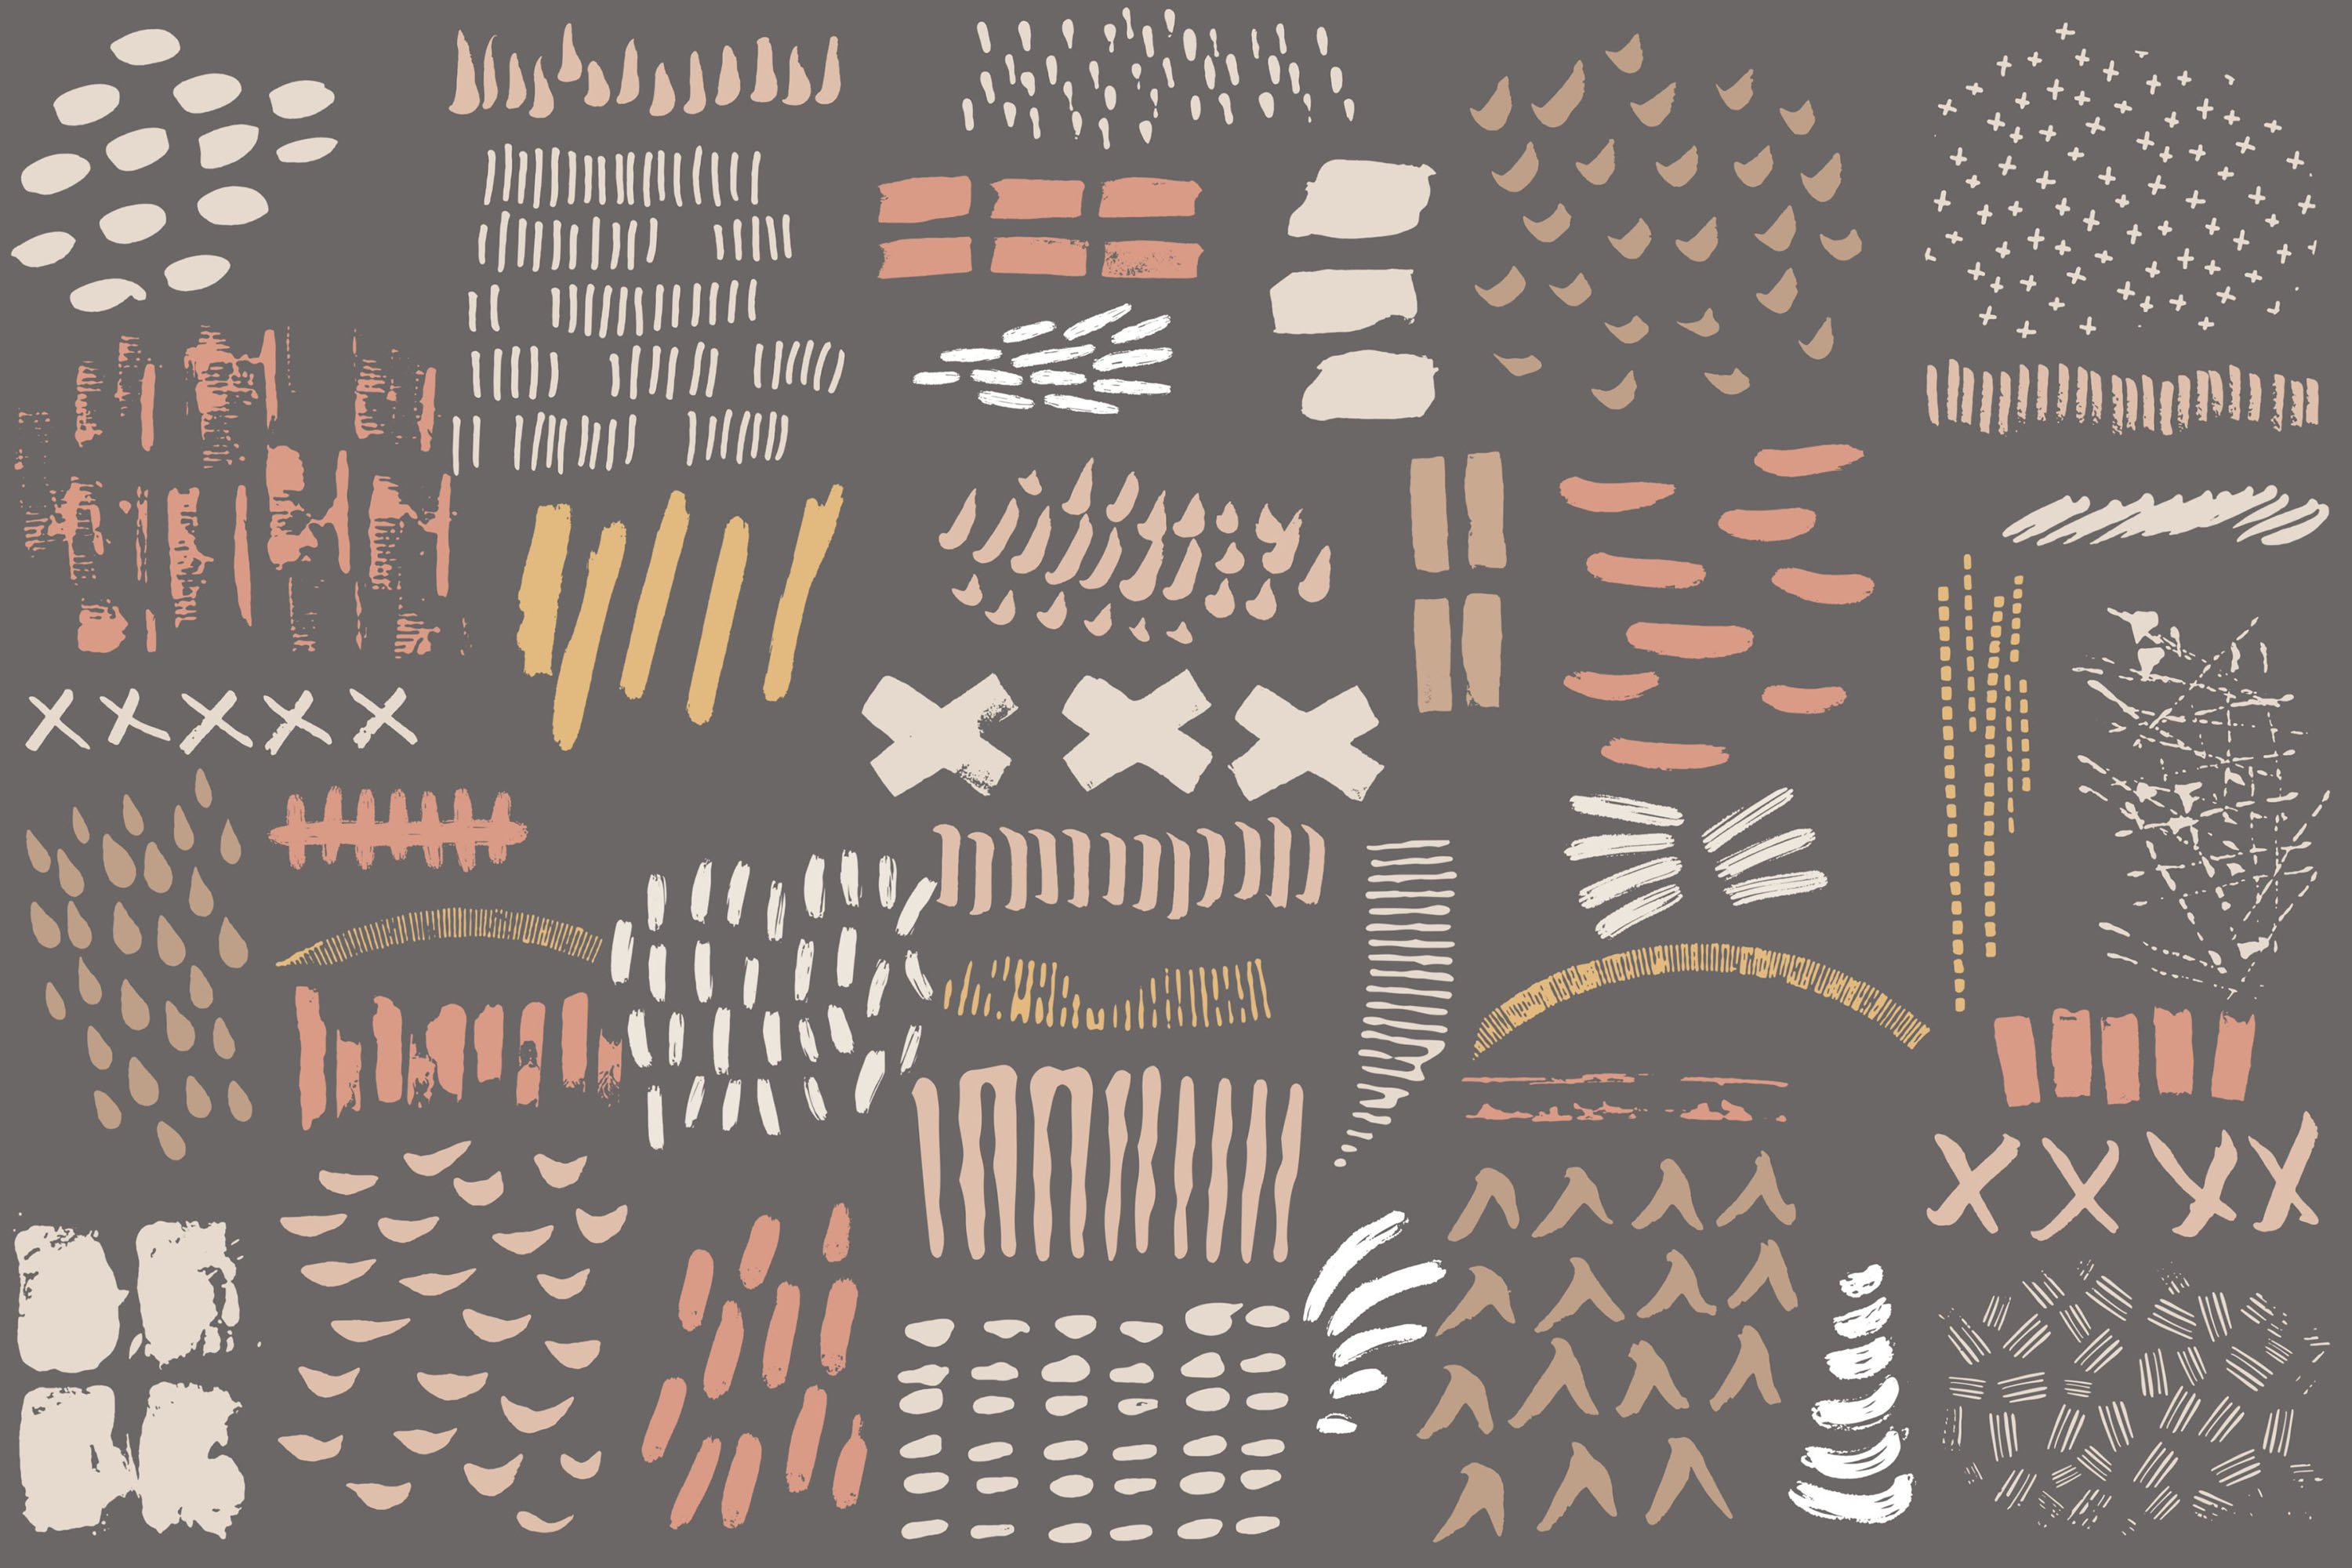 hg modernabstract preview brushes 4 894